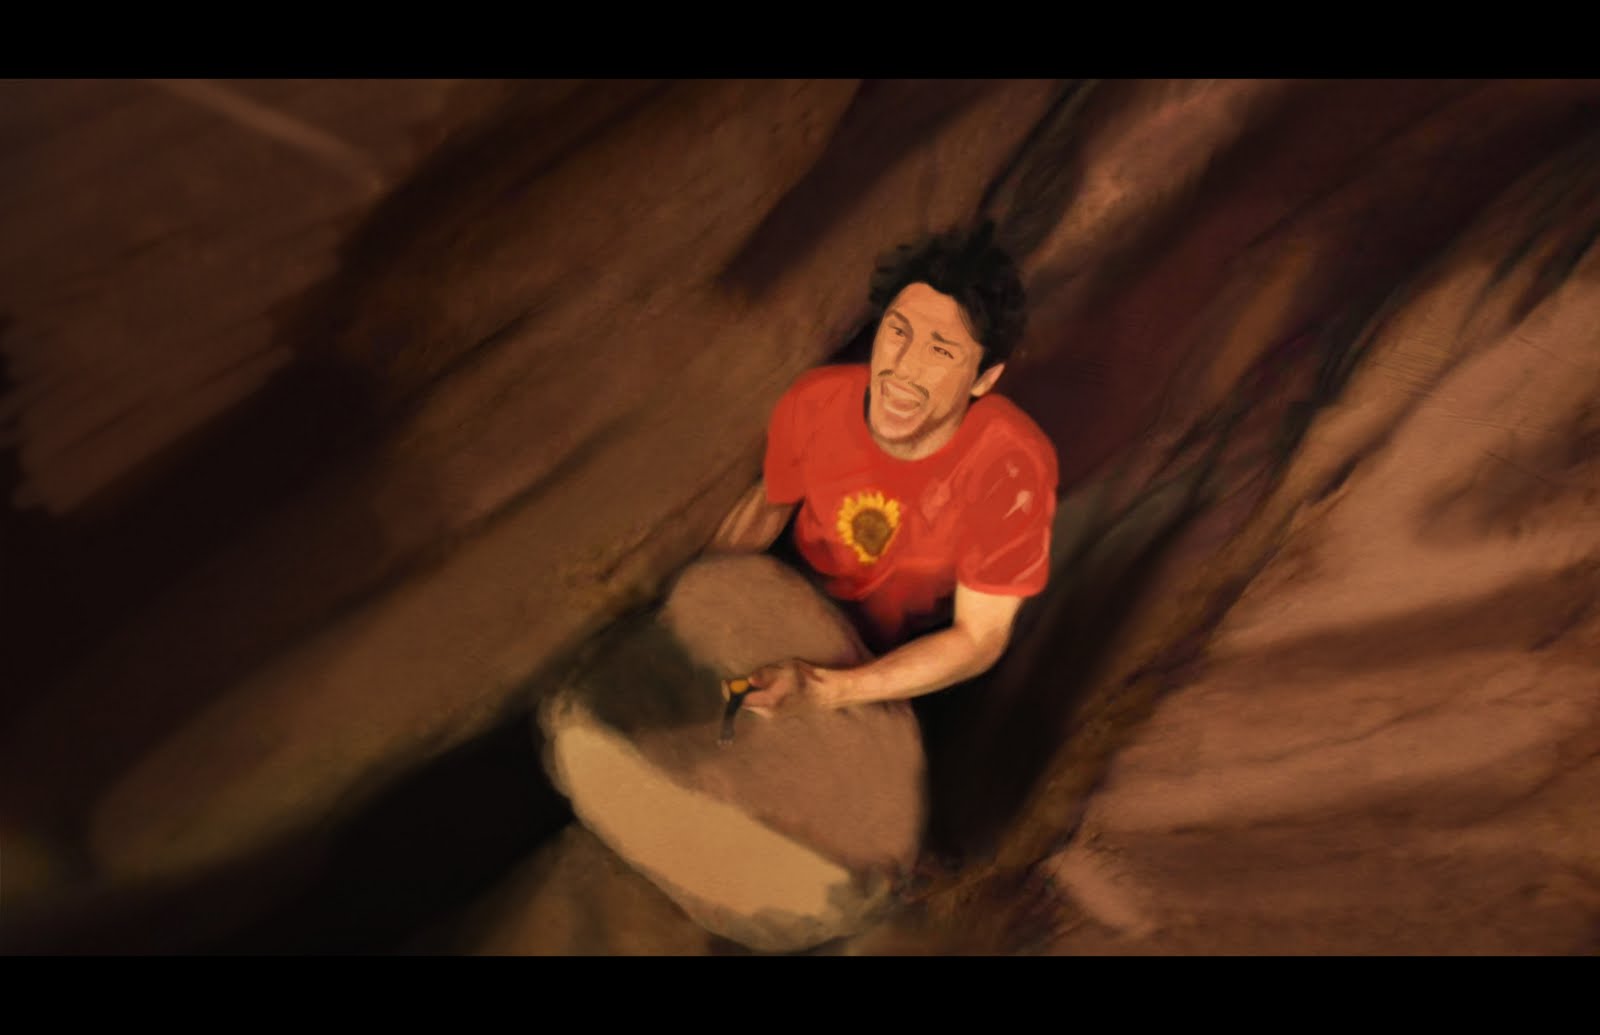 127 Hours Images | Crazy Gallery